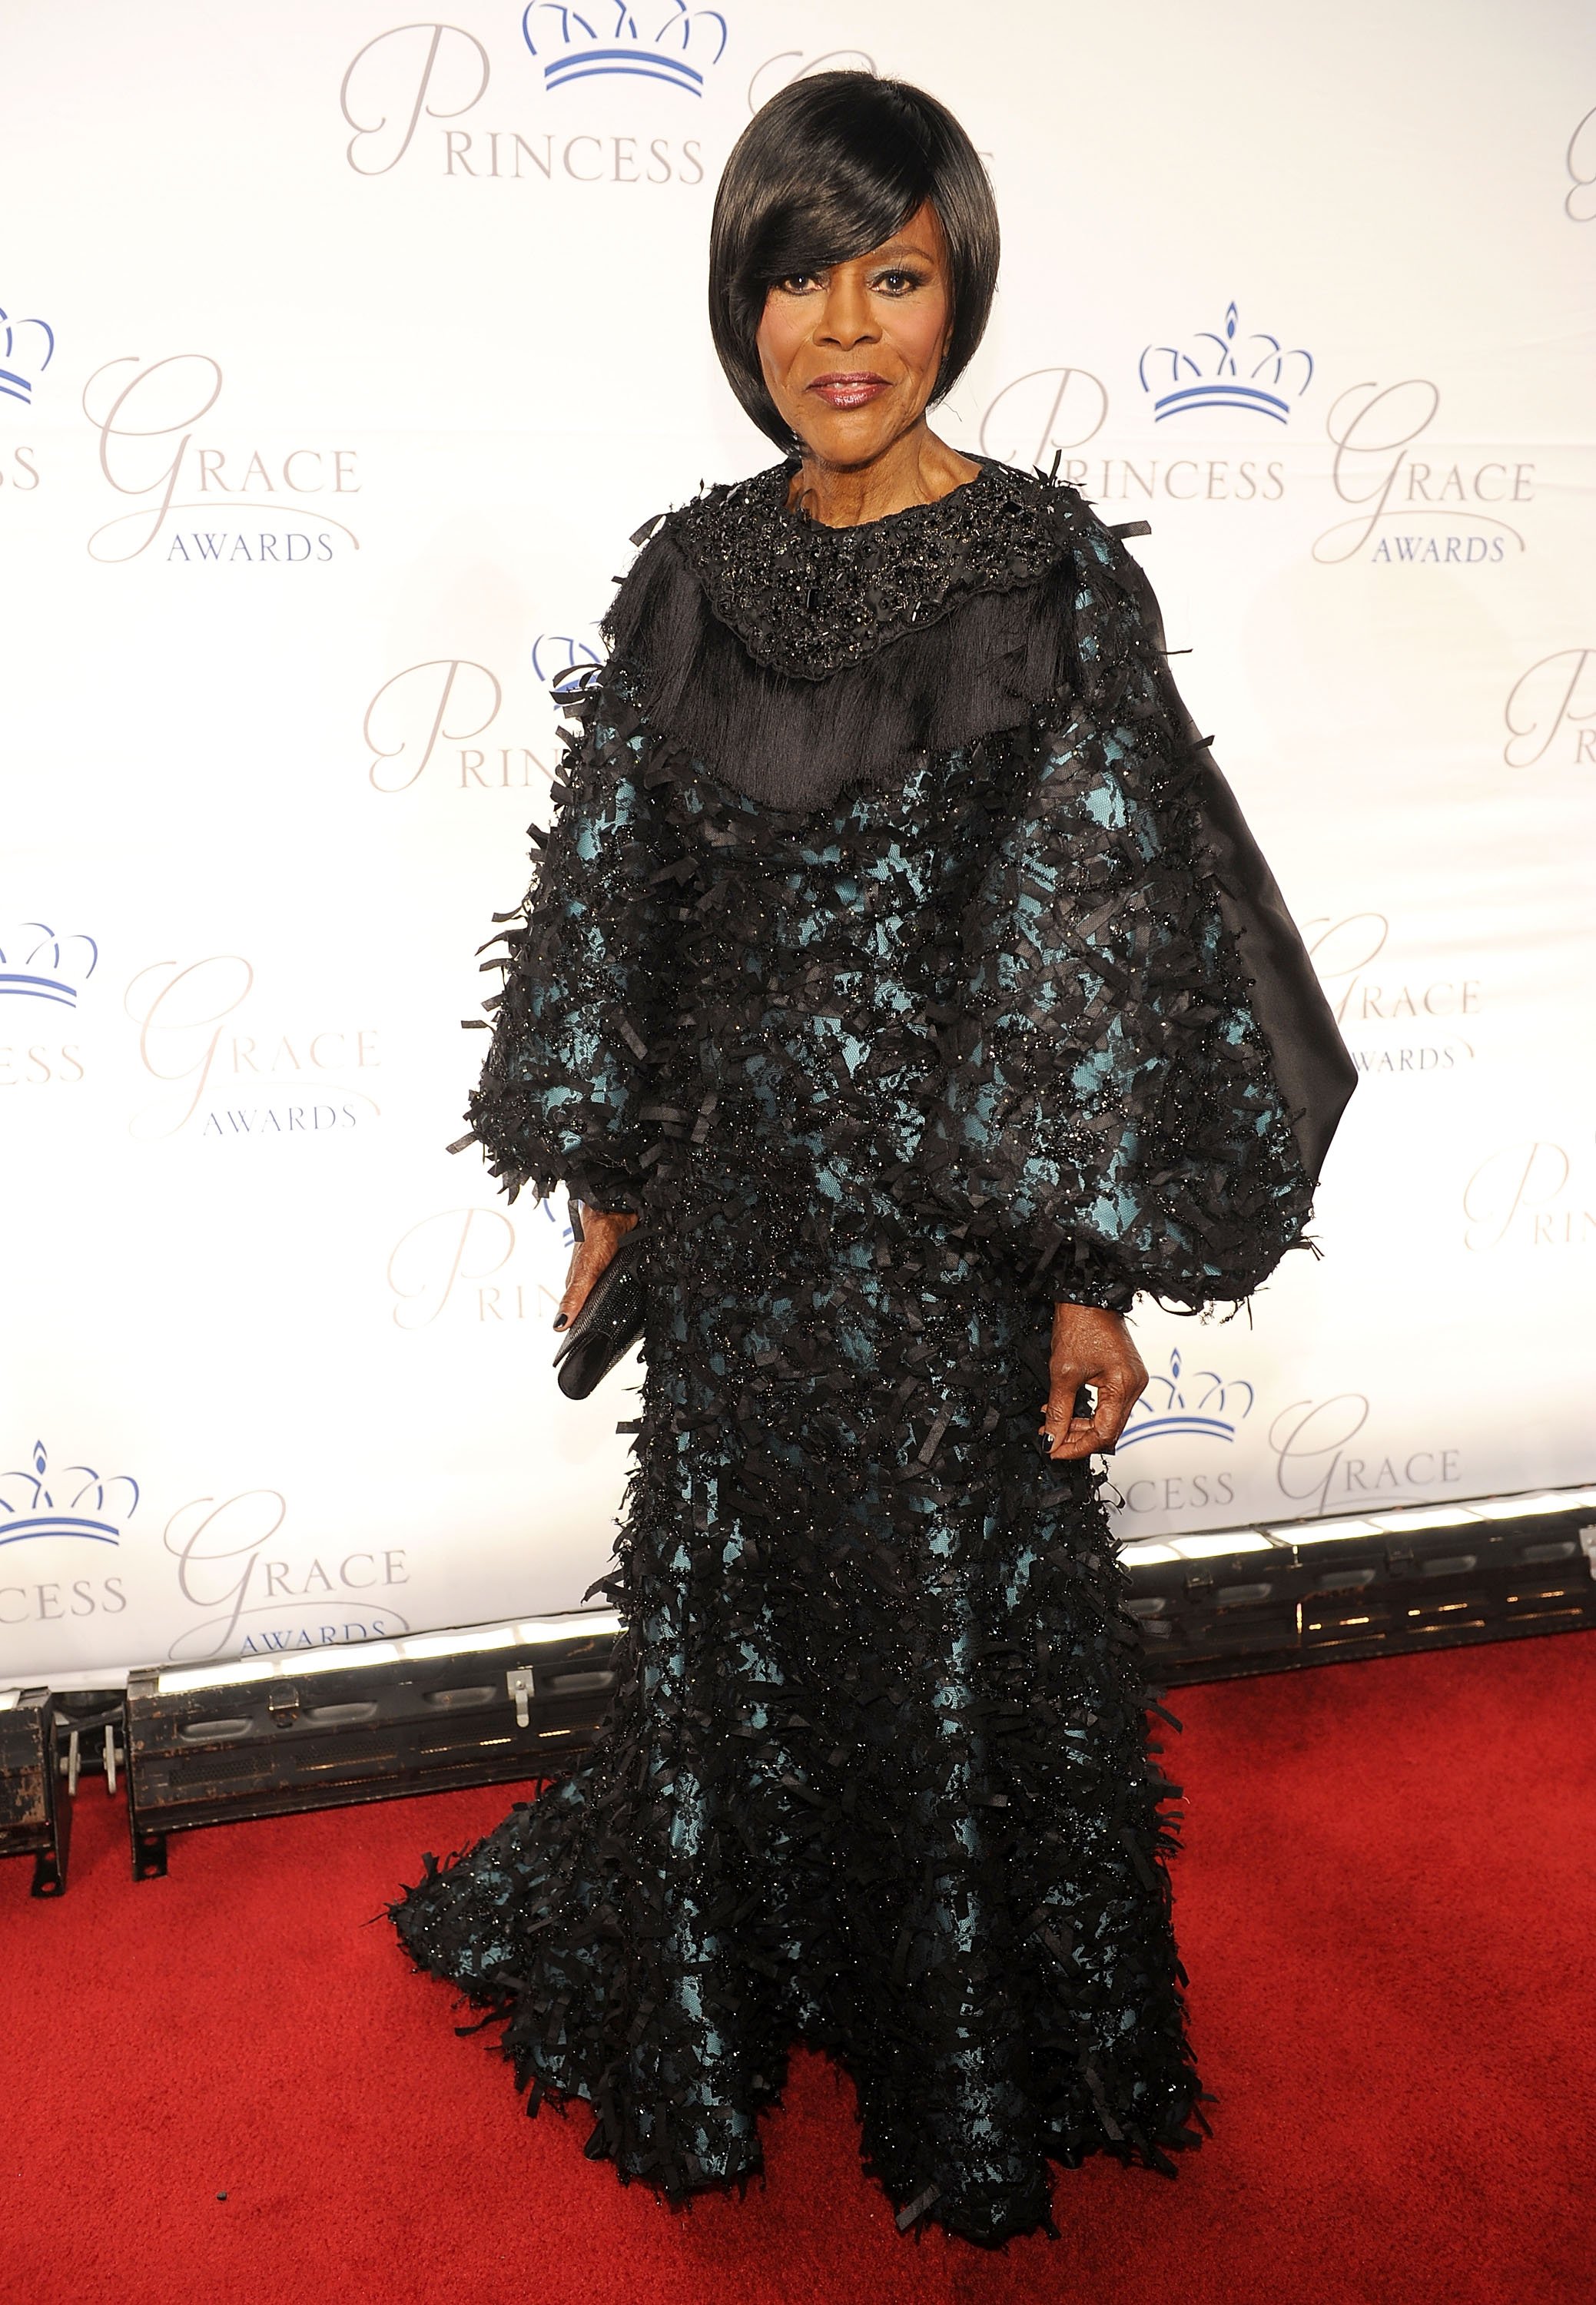 Cicely Tyson attends the 2013 Princess Grace Awards Gala at Cipriani 42nd Street on October 30, 2013 in New York City. | Source: Getty Images